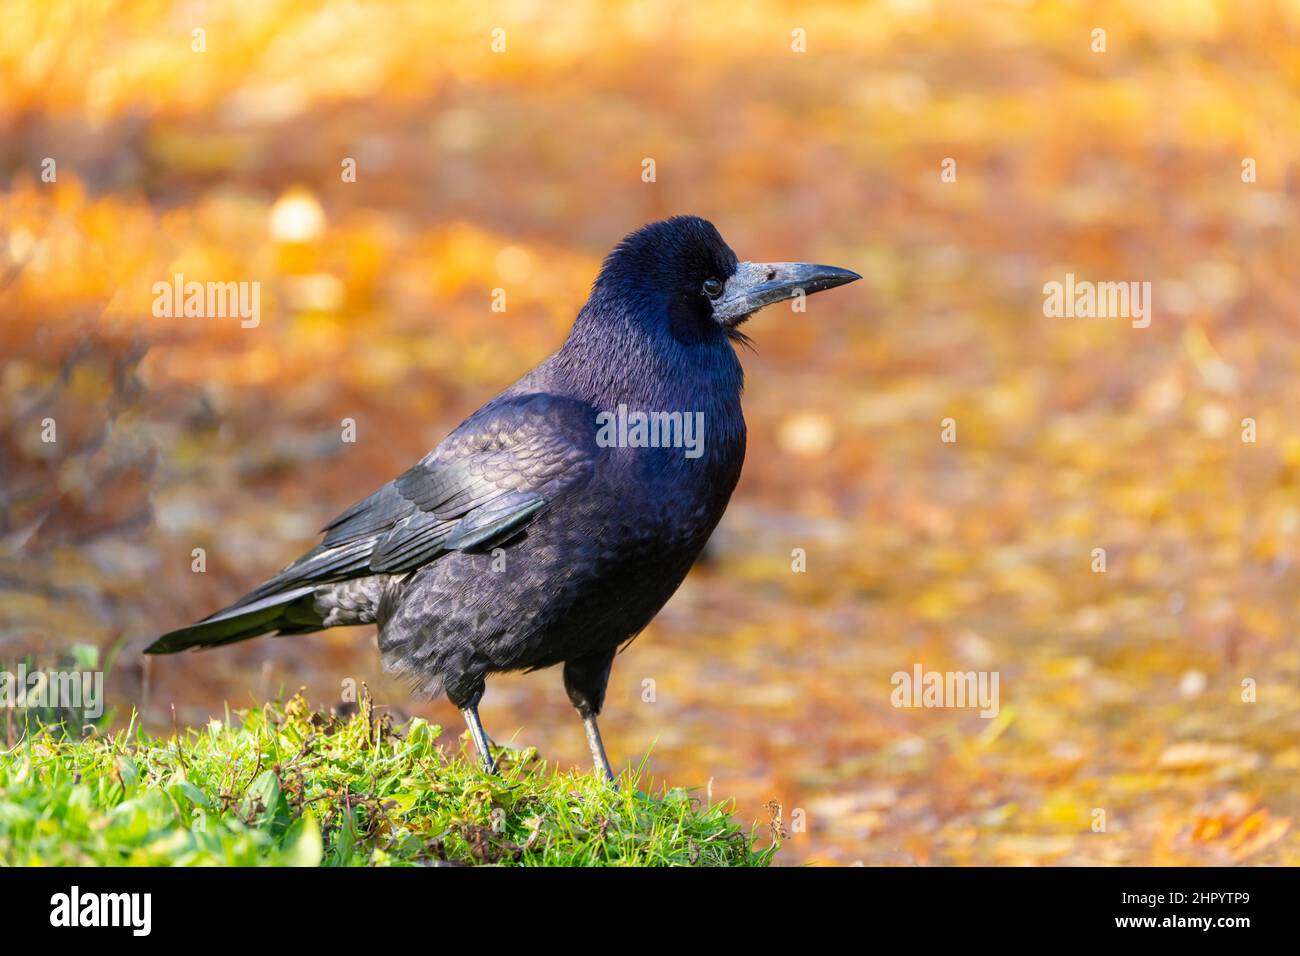 Rook (Corvus frugilegus) standing in front of a coloured background Stock Photo